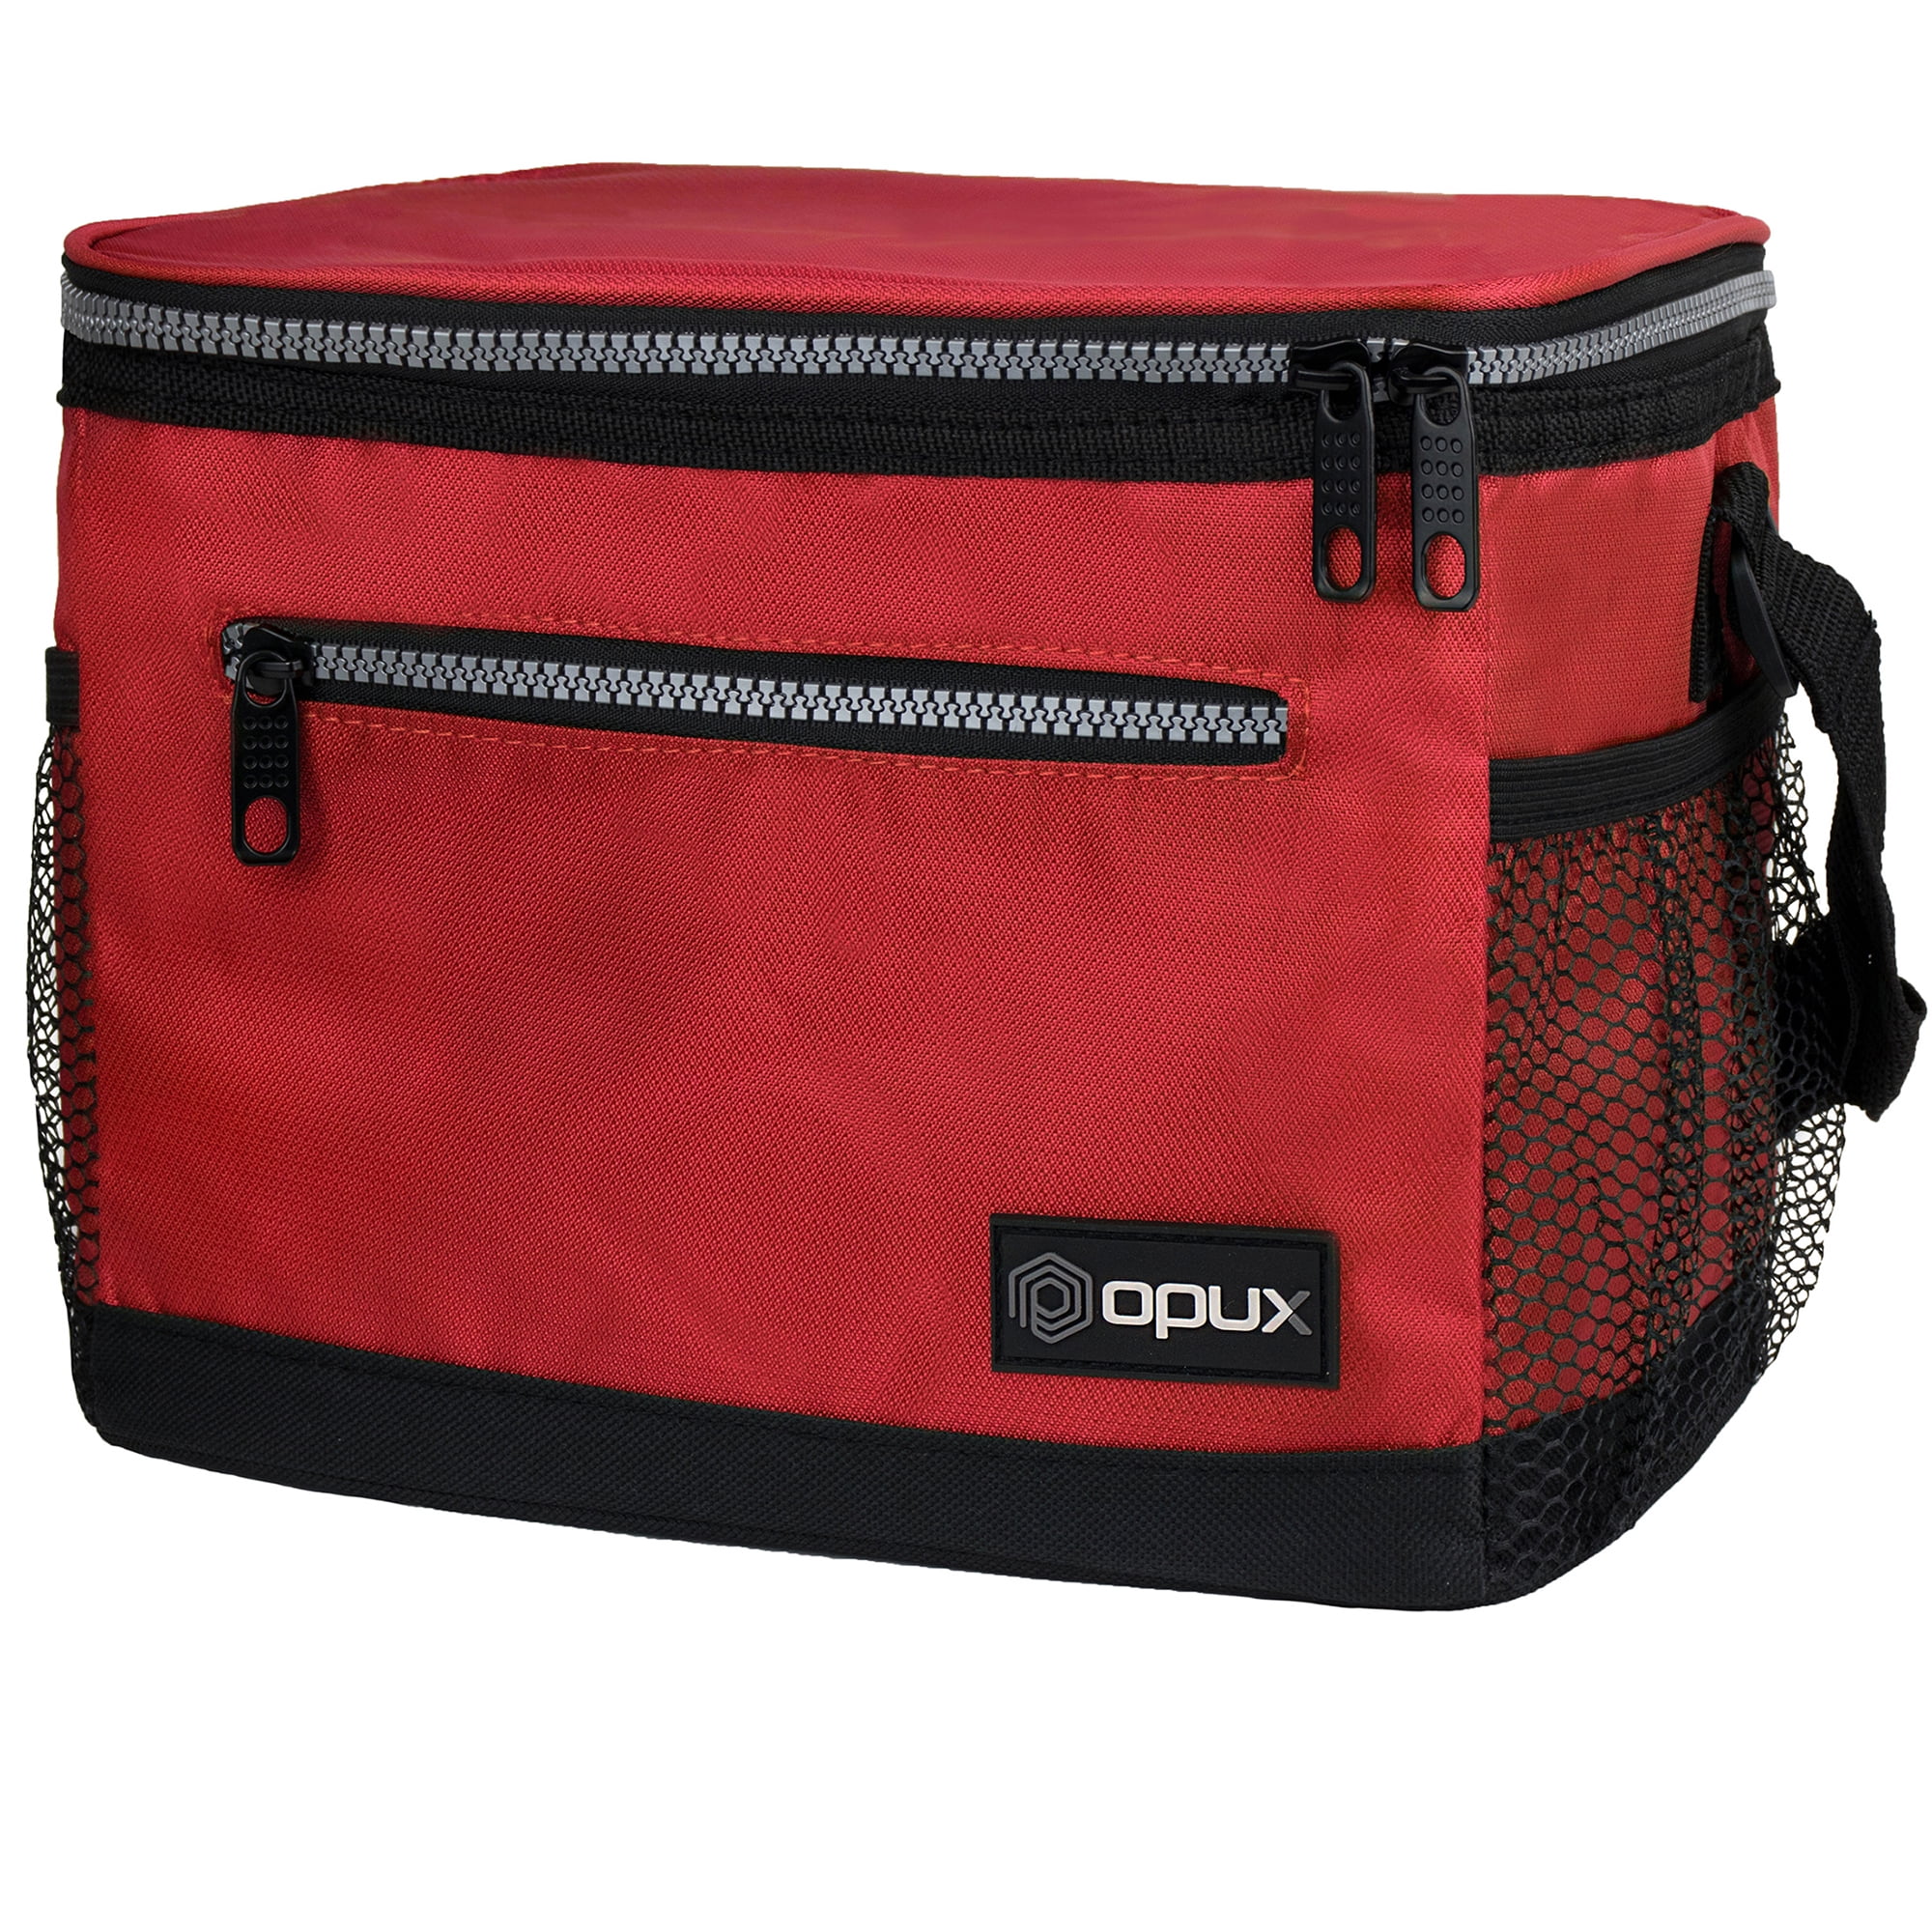 OPUX Thermal Insulated Large Lunch Bag for TravelSoft Collapsible Mini Cooler 